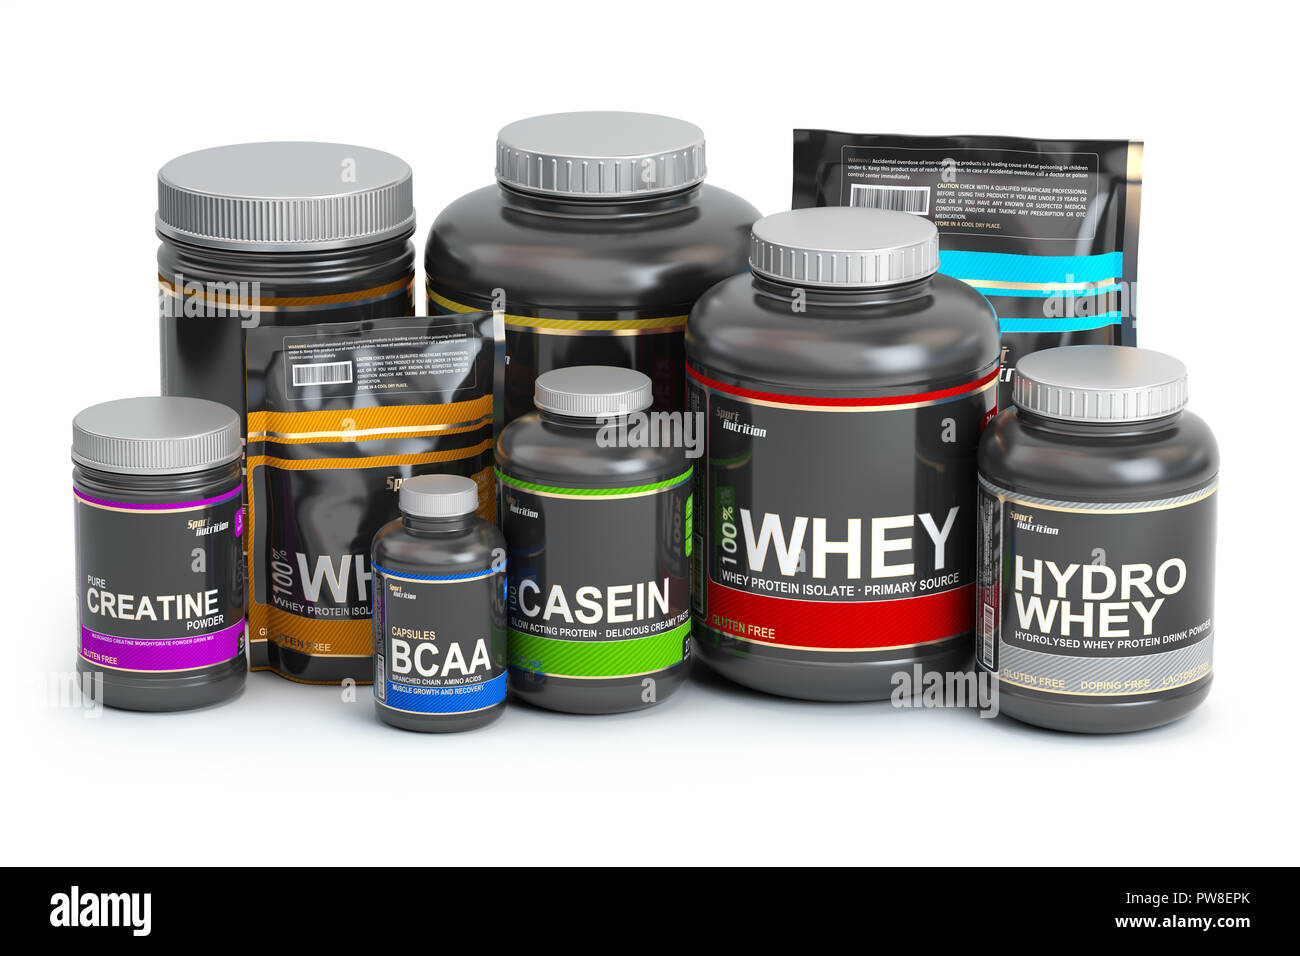 Sports Nutrition Supplements For Bodybuilding Whey Protein Images, Photos, Reviews